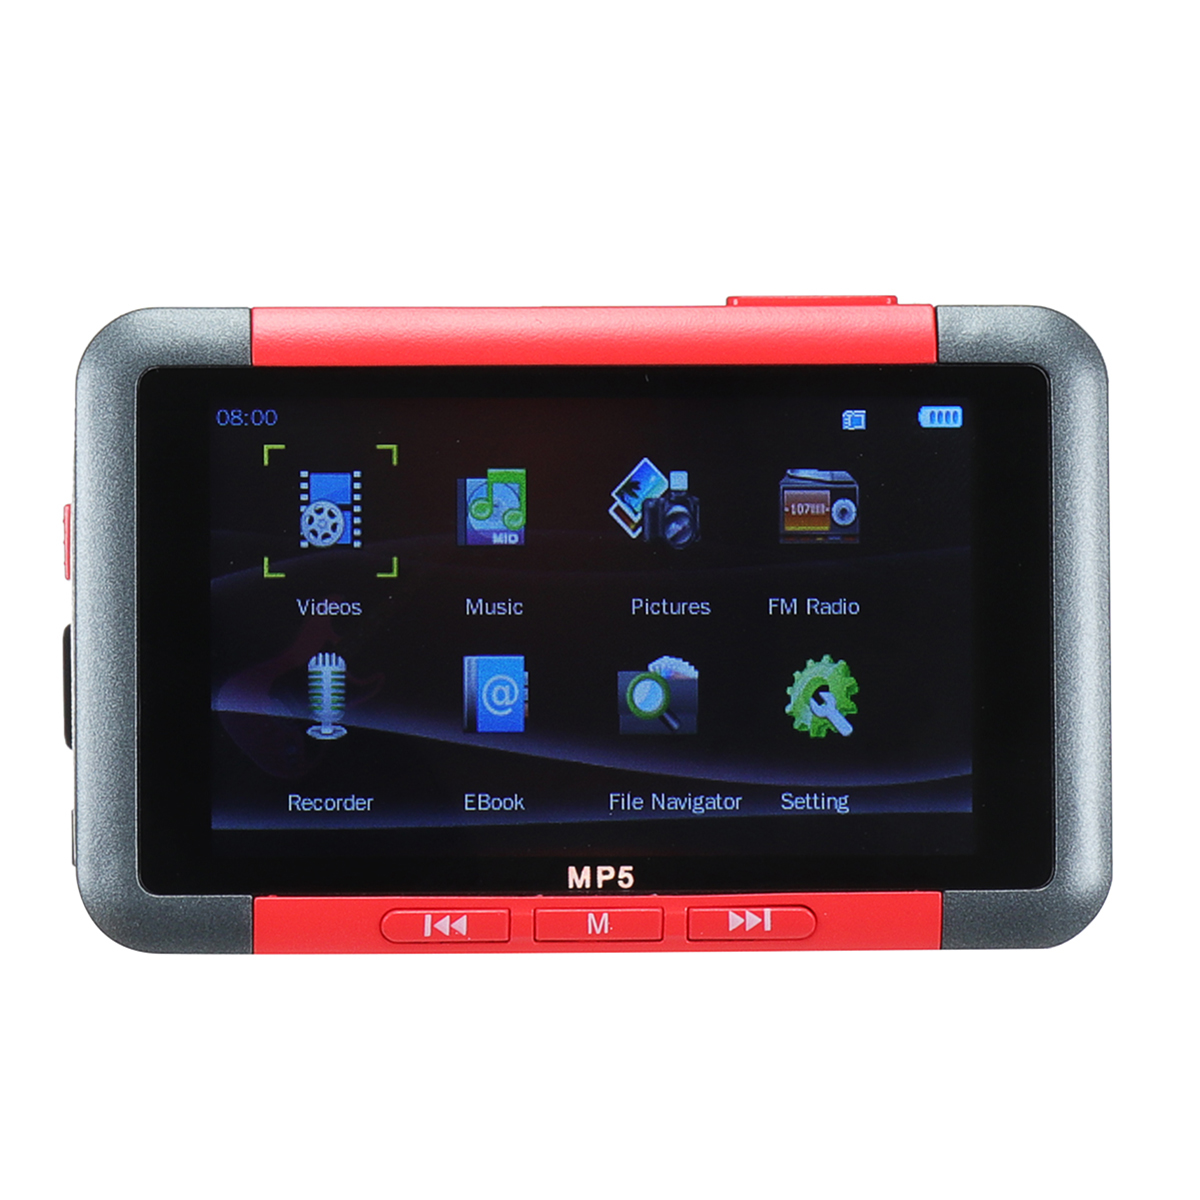 32-GB-MP3-MP4-MP5-Player-Video-Music-Player-30-Inch-Support-FM-TF-Card-With-Headphone-1370715